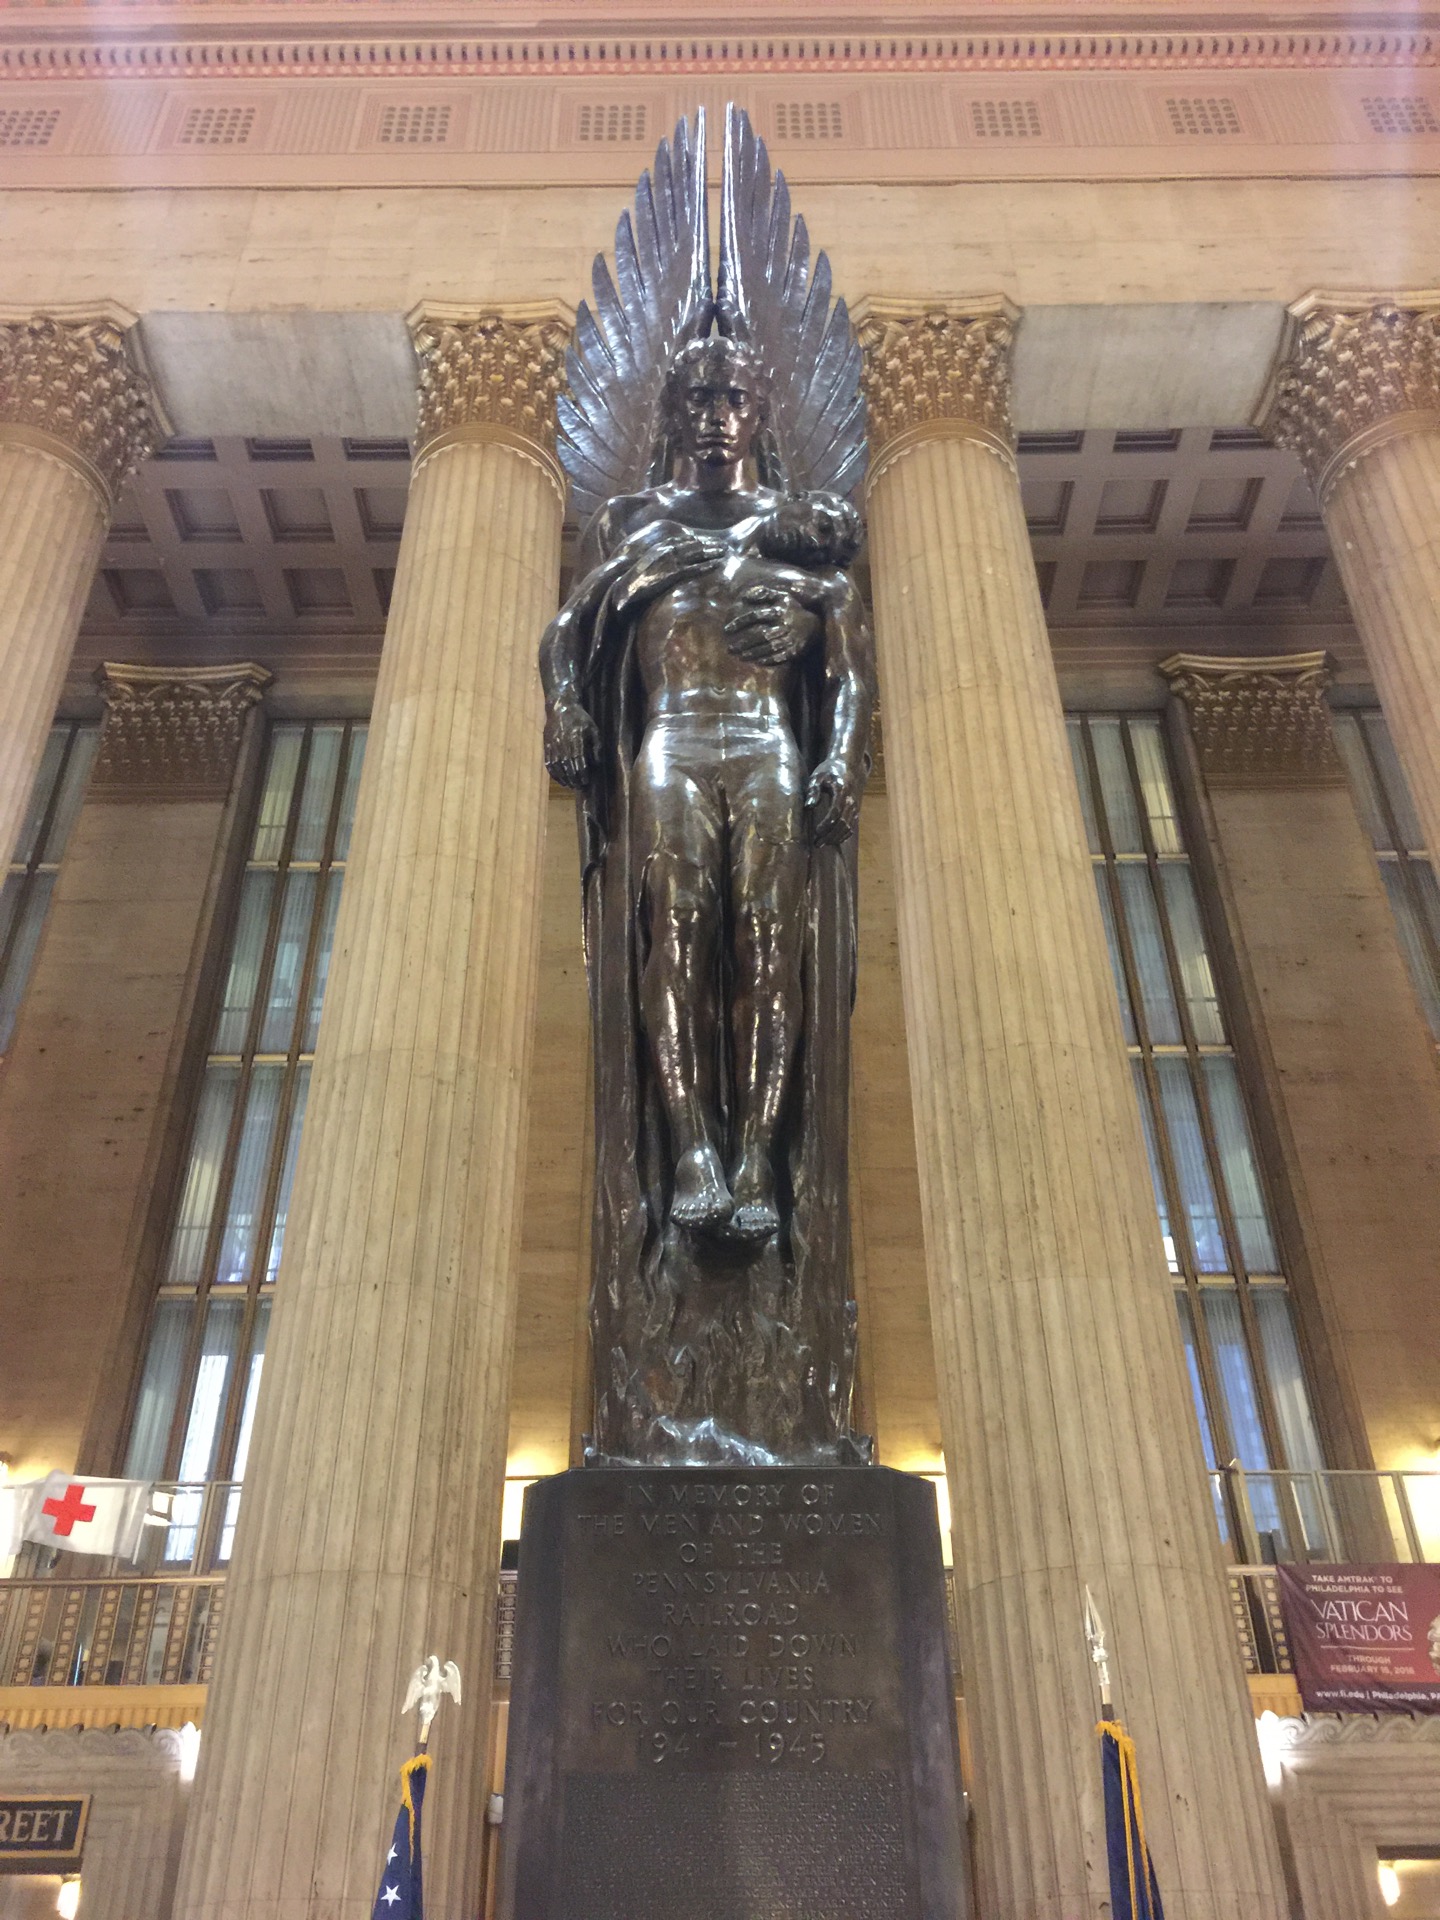 Checked in at 30th Street Station